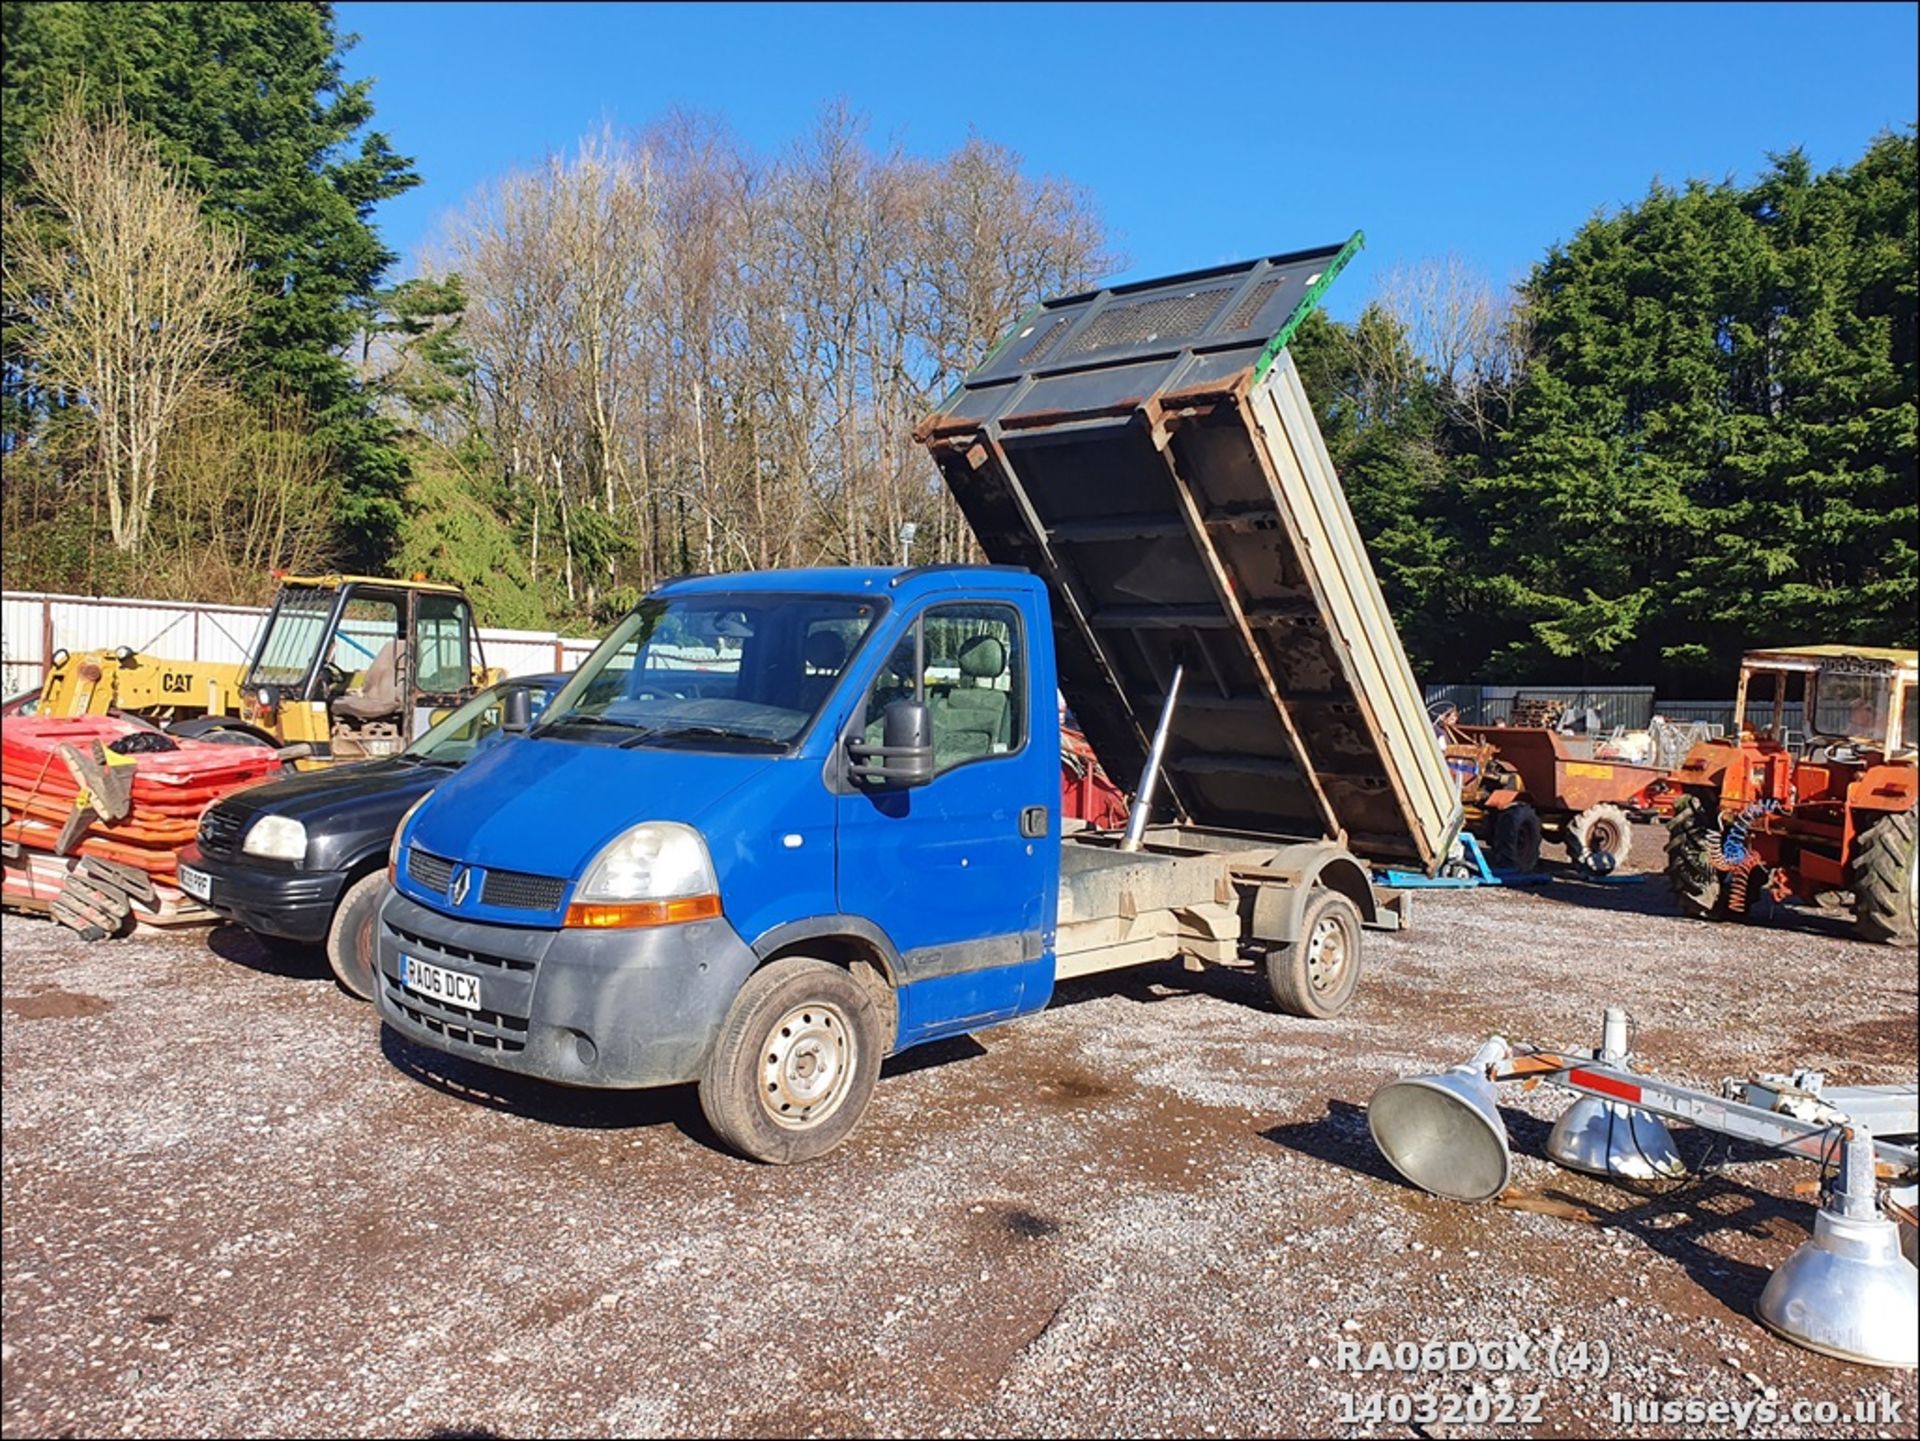 06/06 RENAULT MASTER CCML35 DCI 120 MWB - 2463cc 2dr Tipper (Grey) - Image 5 of 23